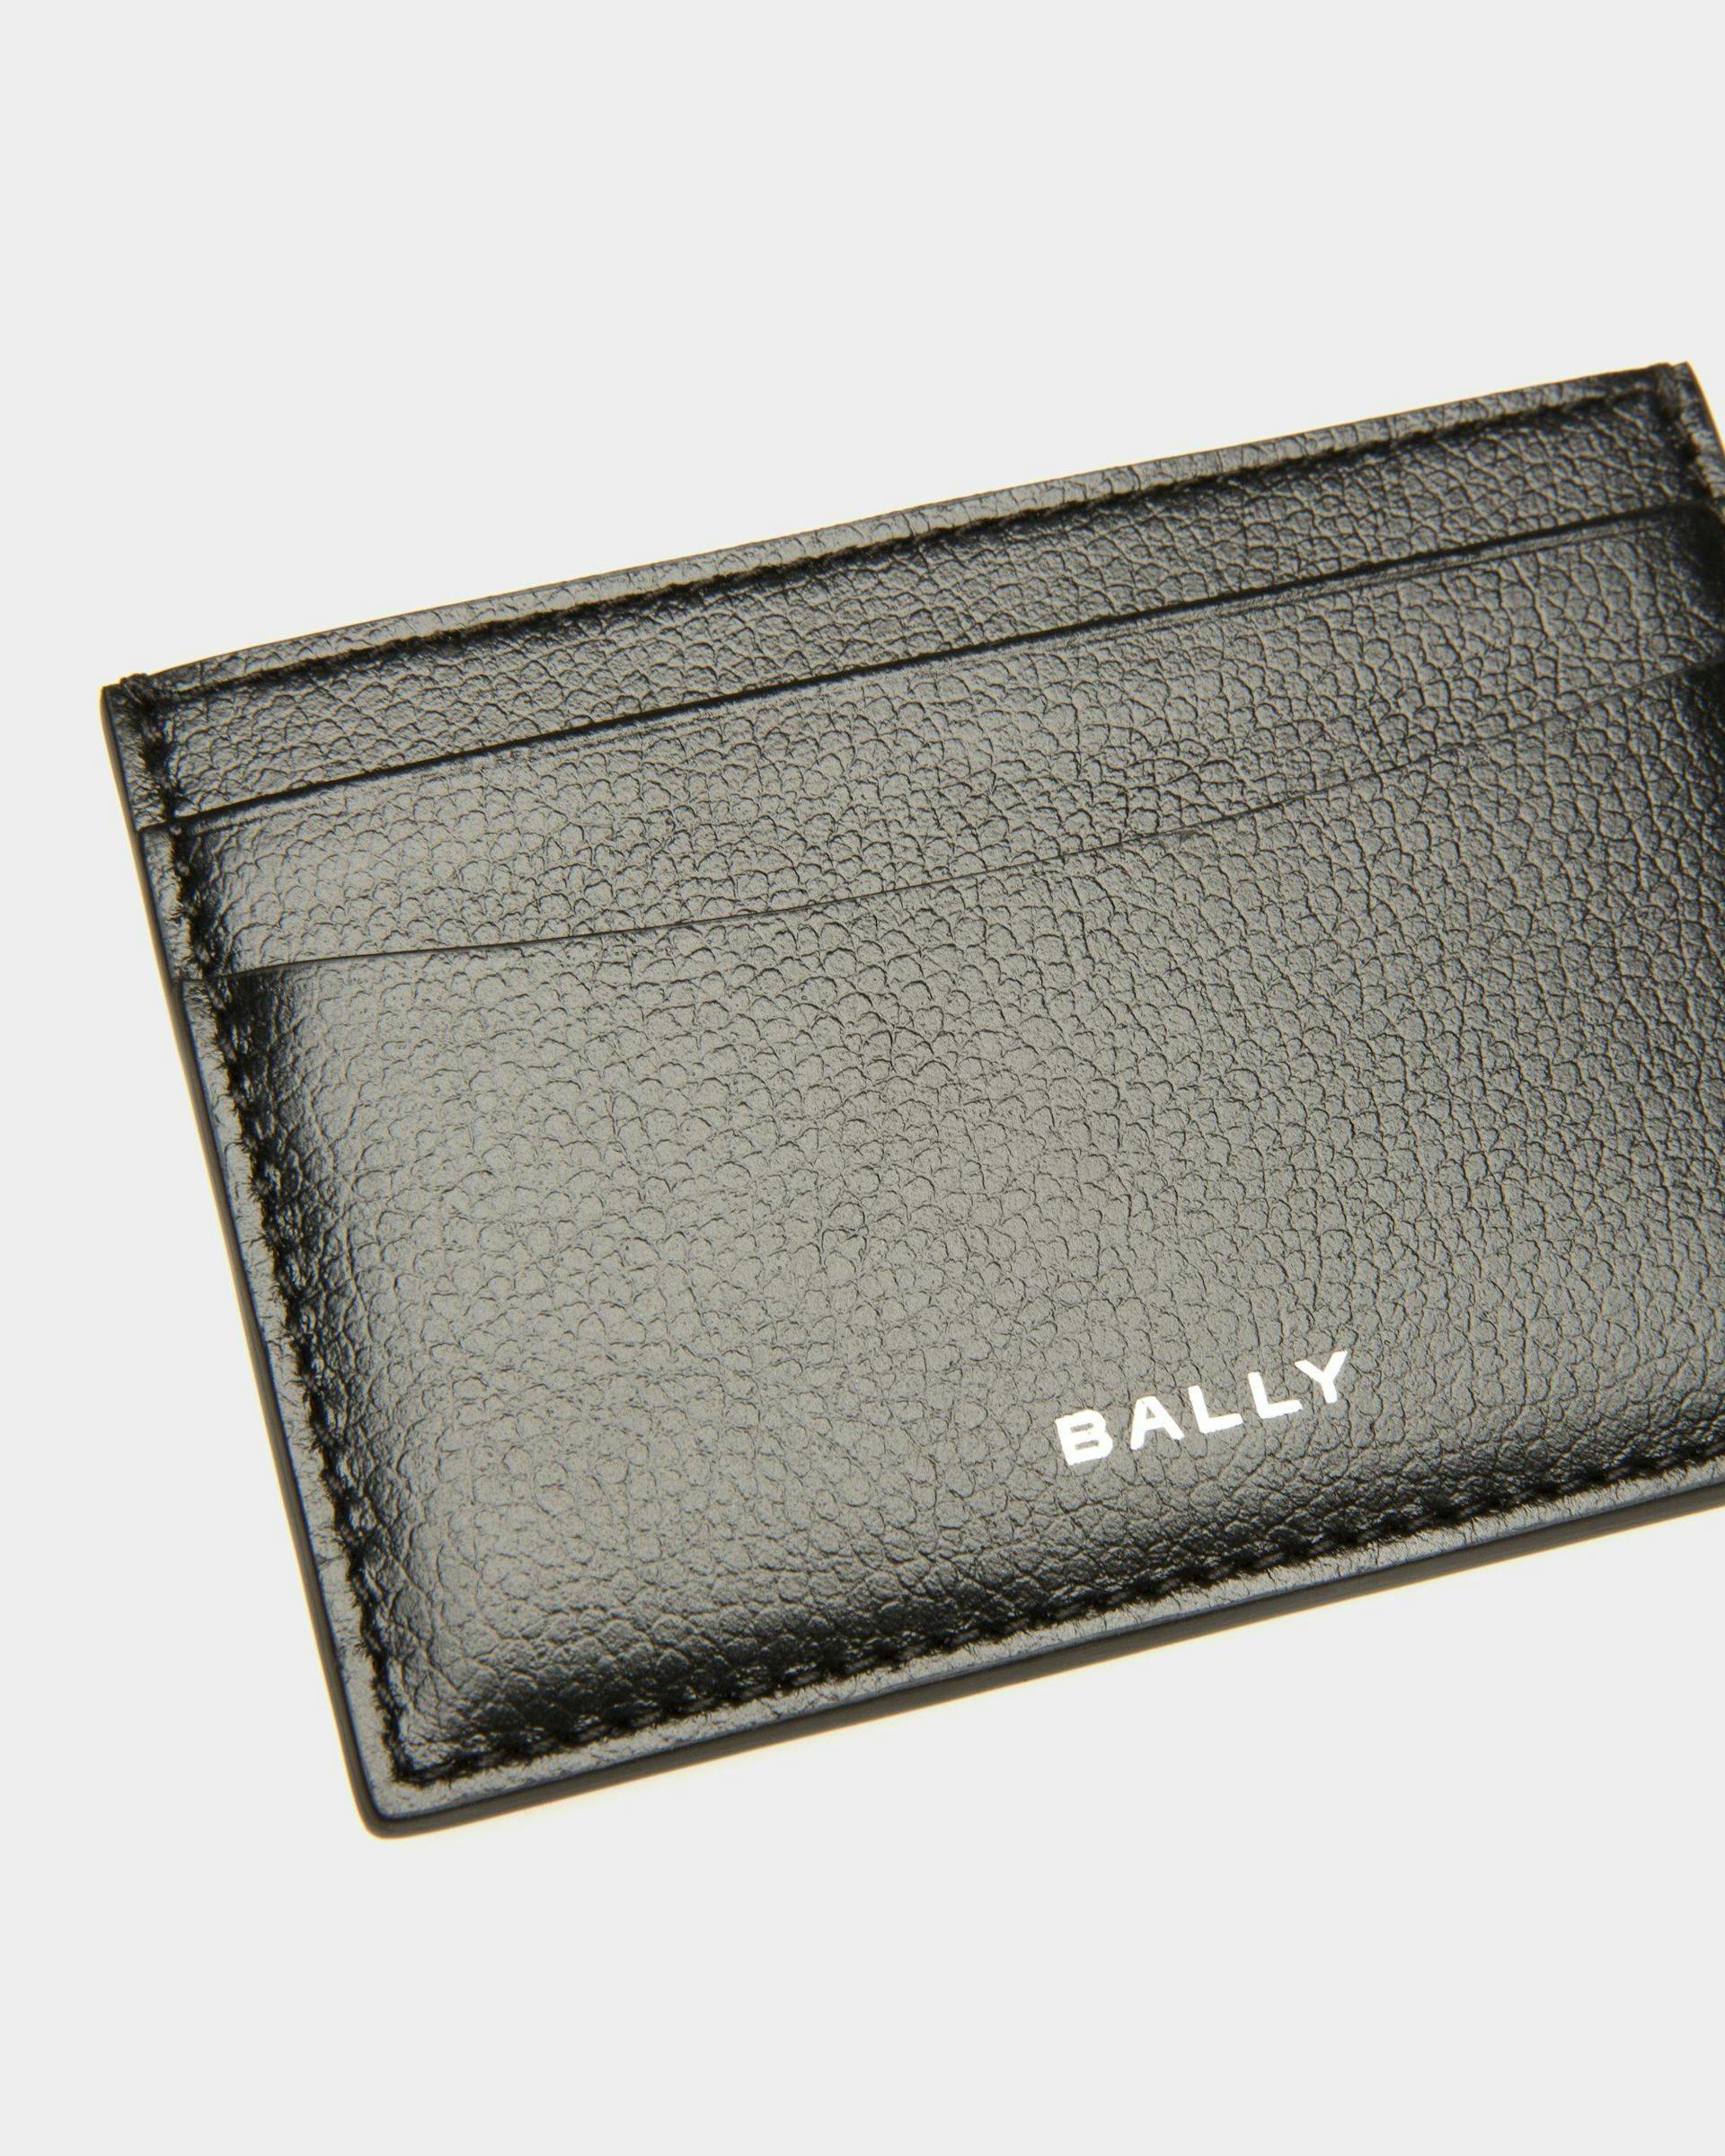 Banque Business Card Holder In Black Leather - Men's - Bally - 04